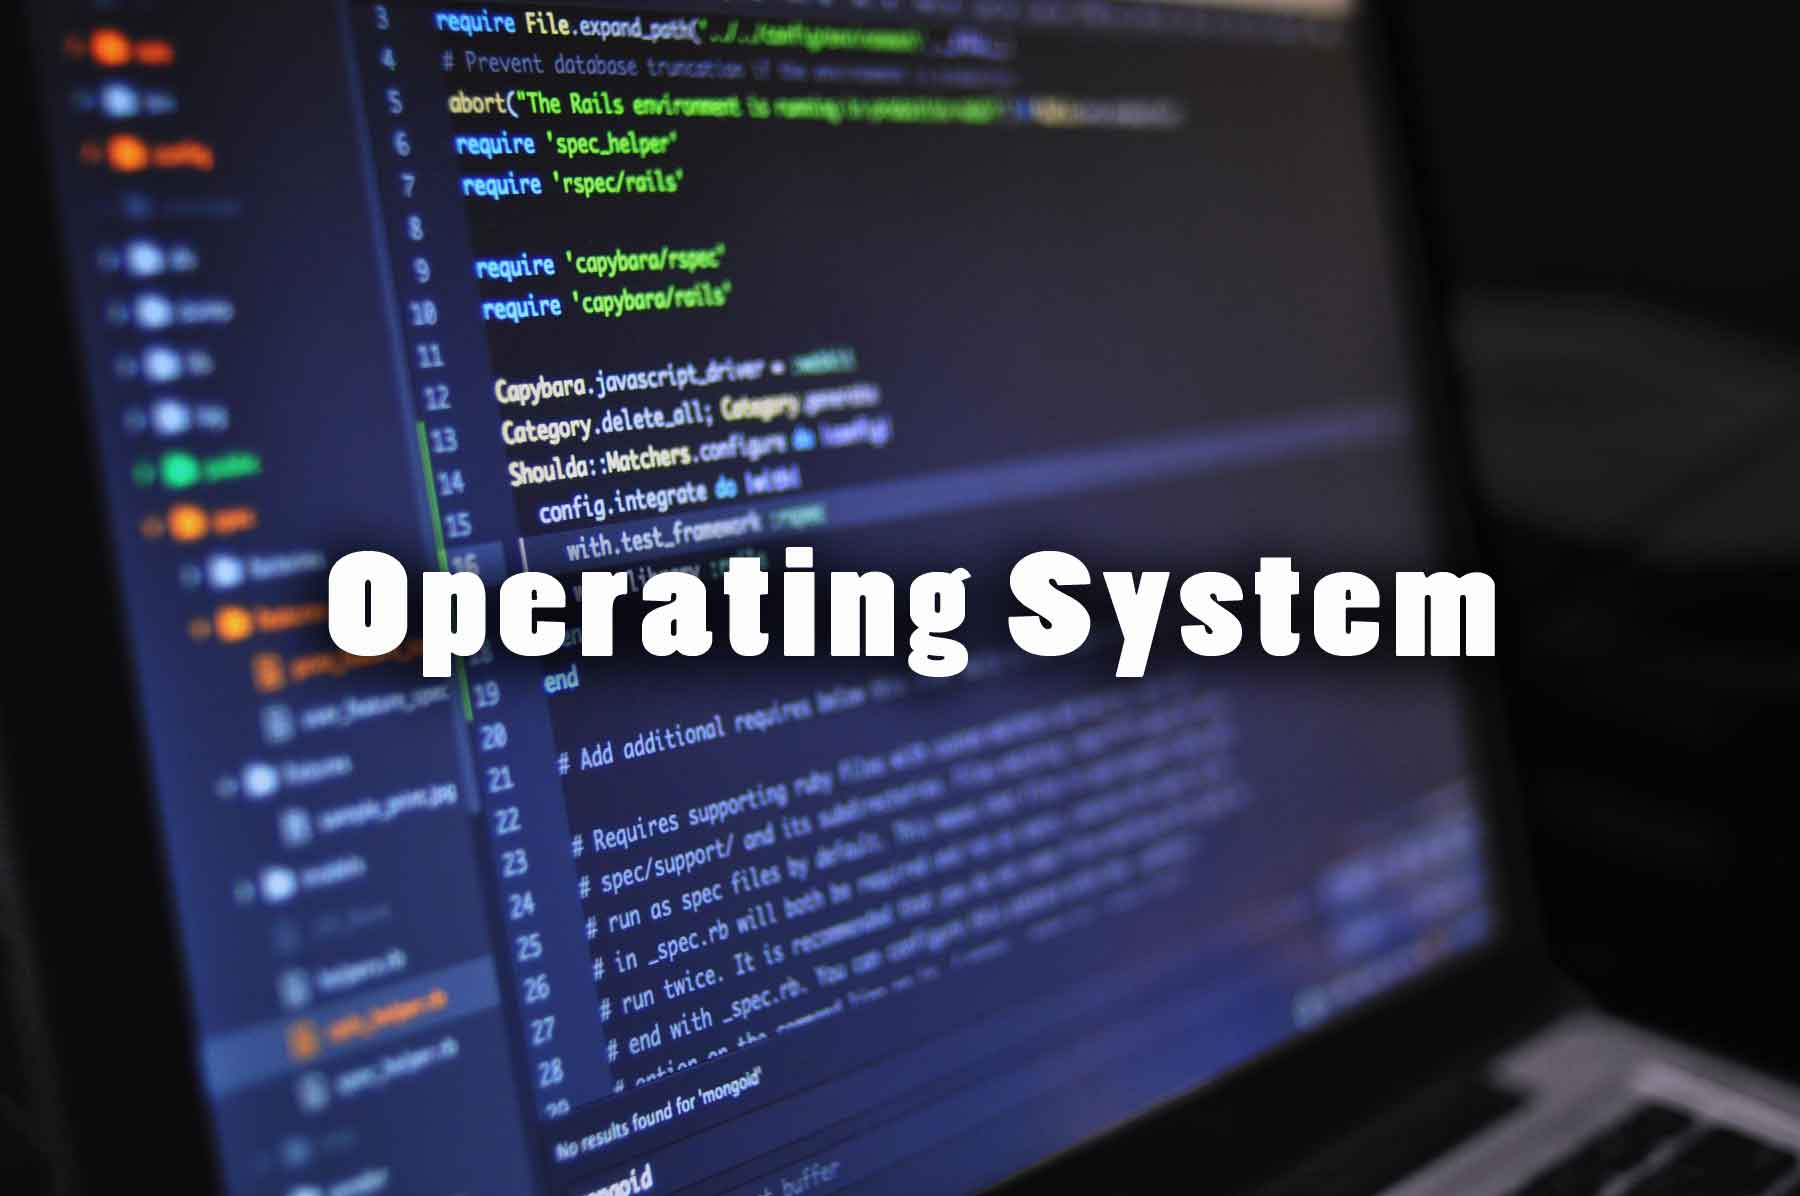 Operating System Previous Year Questions and Answers